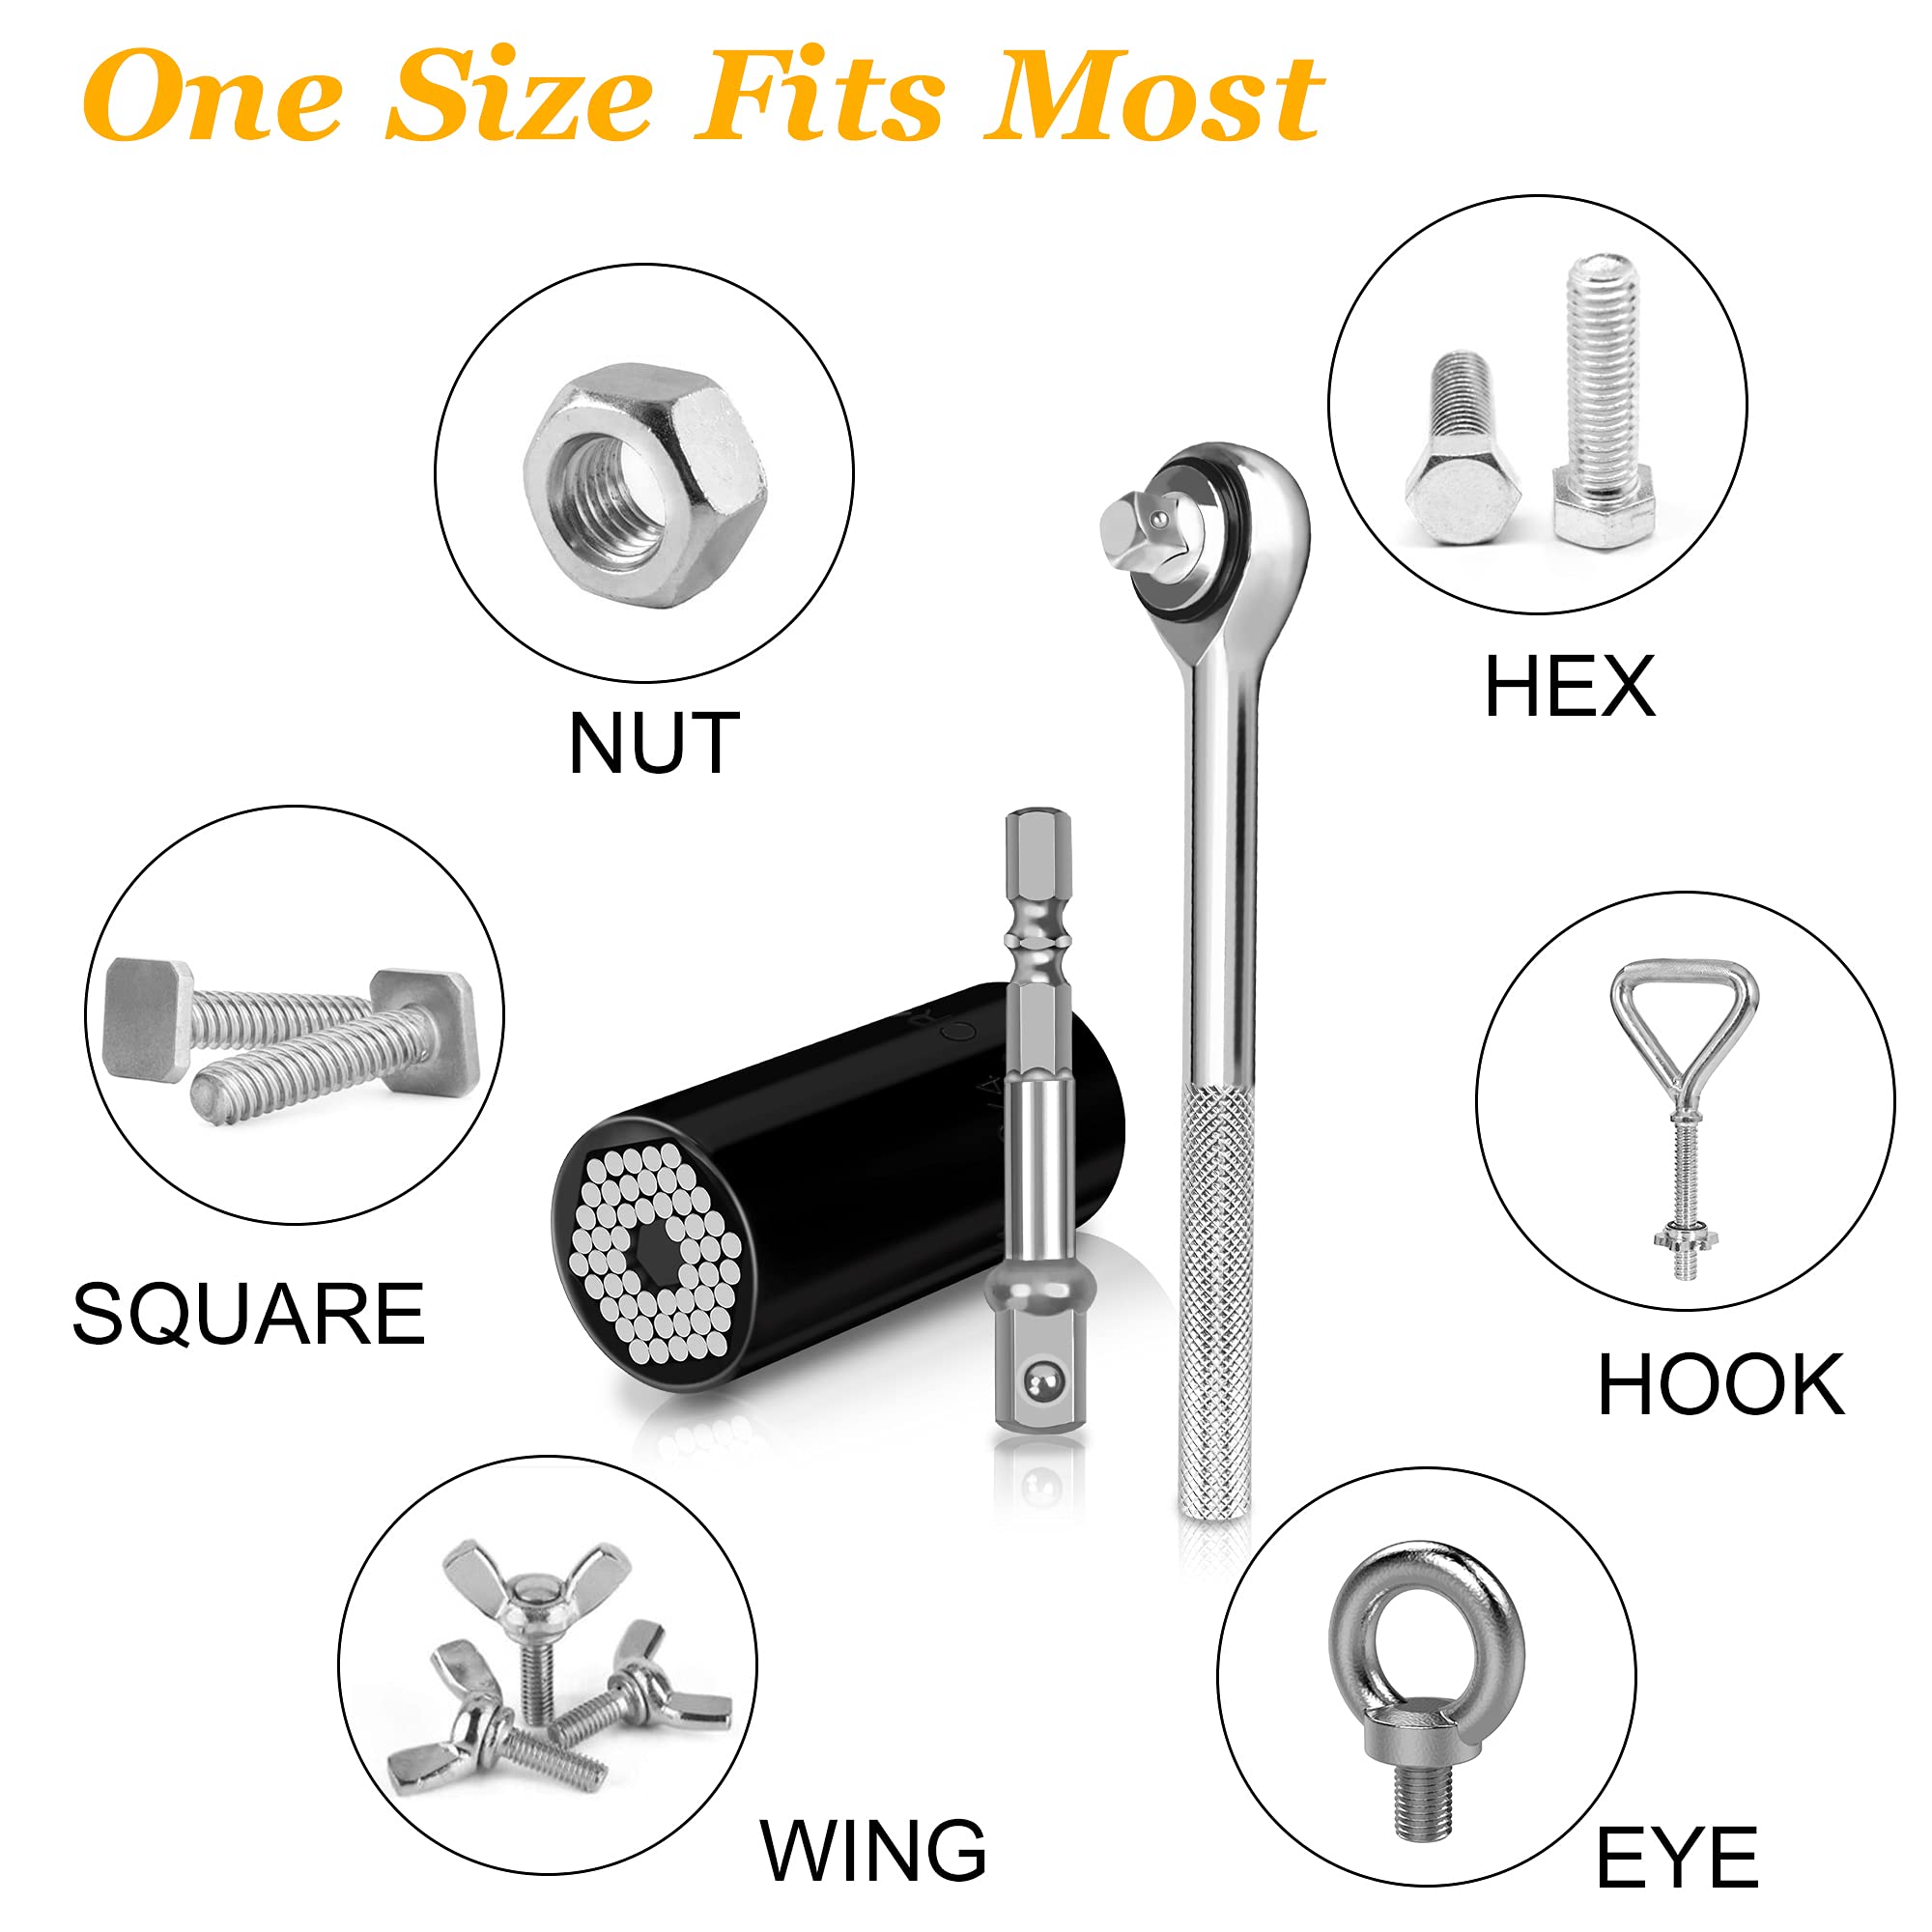 Gifts for Men Him Boyfriend Husband, Universal Socket Wrench Grip Socket Tool Sets Fits Standard 1/4'' - 3/4'' Metric 7mm-19mm with Power Drill Adapter(black)